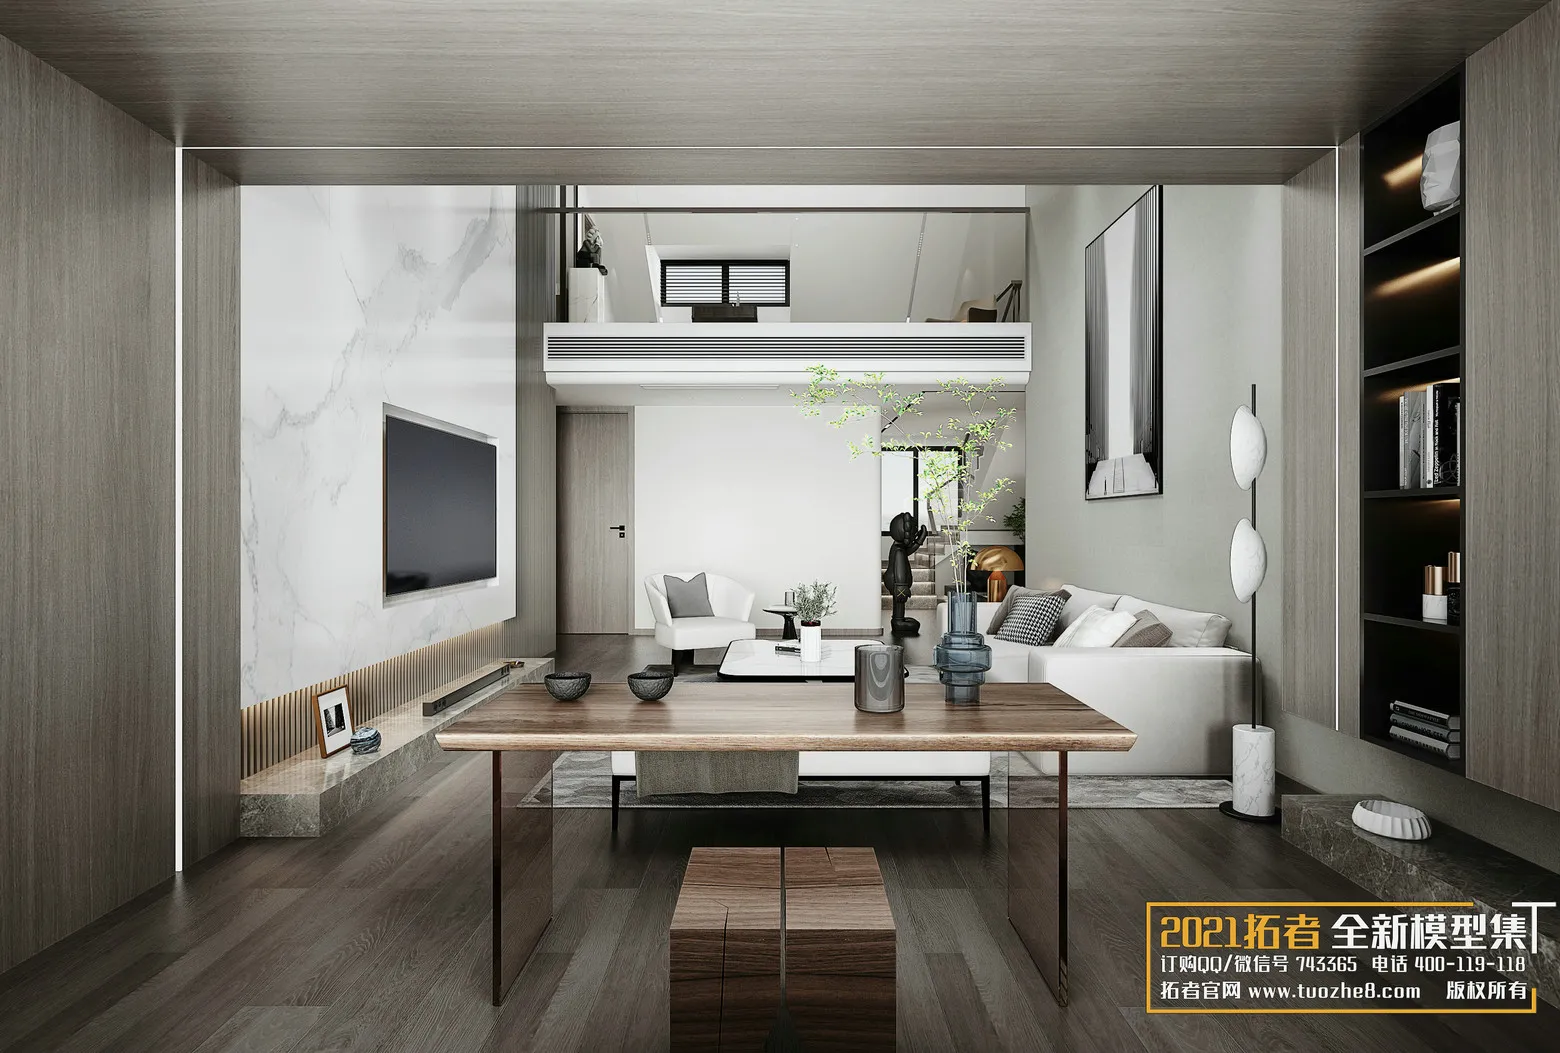 EXTENSION 2021 – 1. LIVING ROOM – 1.2. CHINESE STYLES – 33vr – VRAY